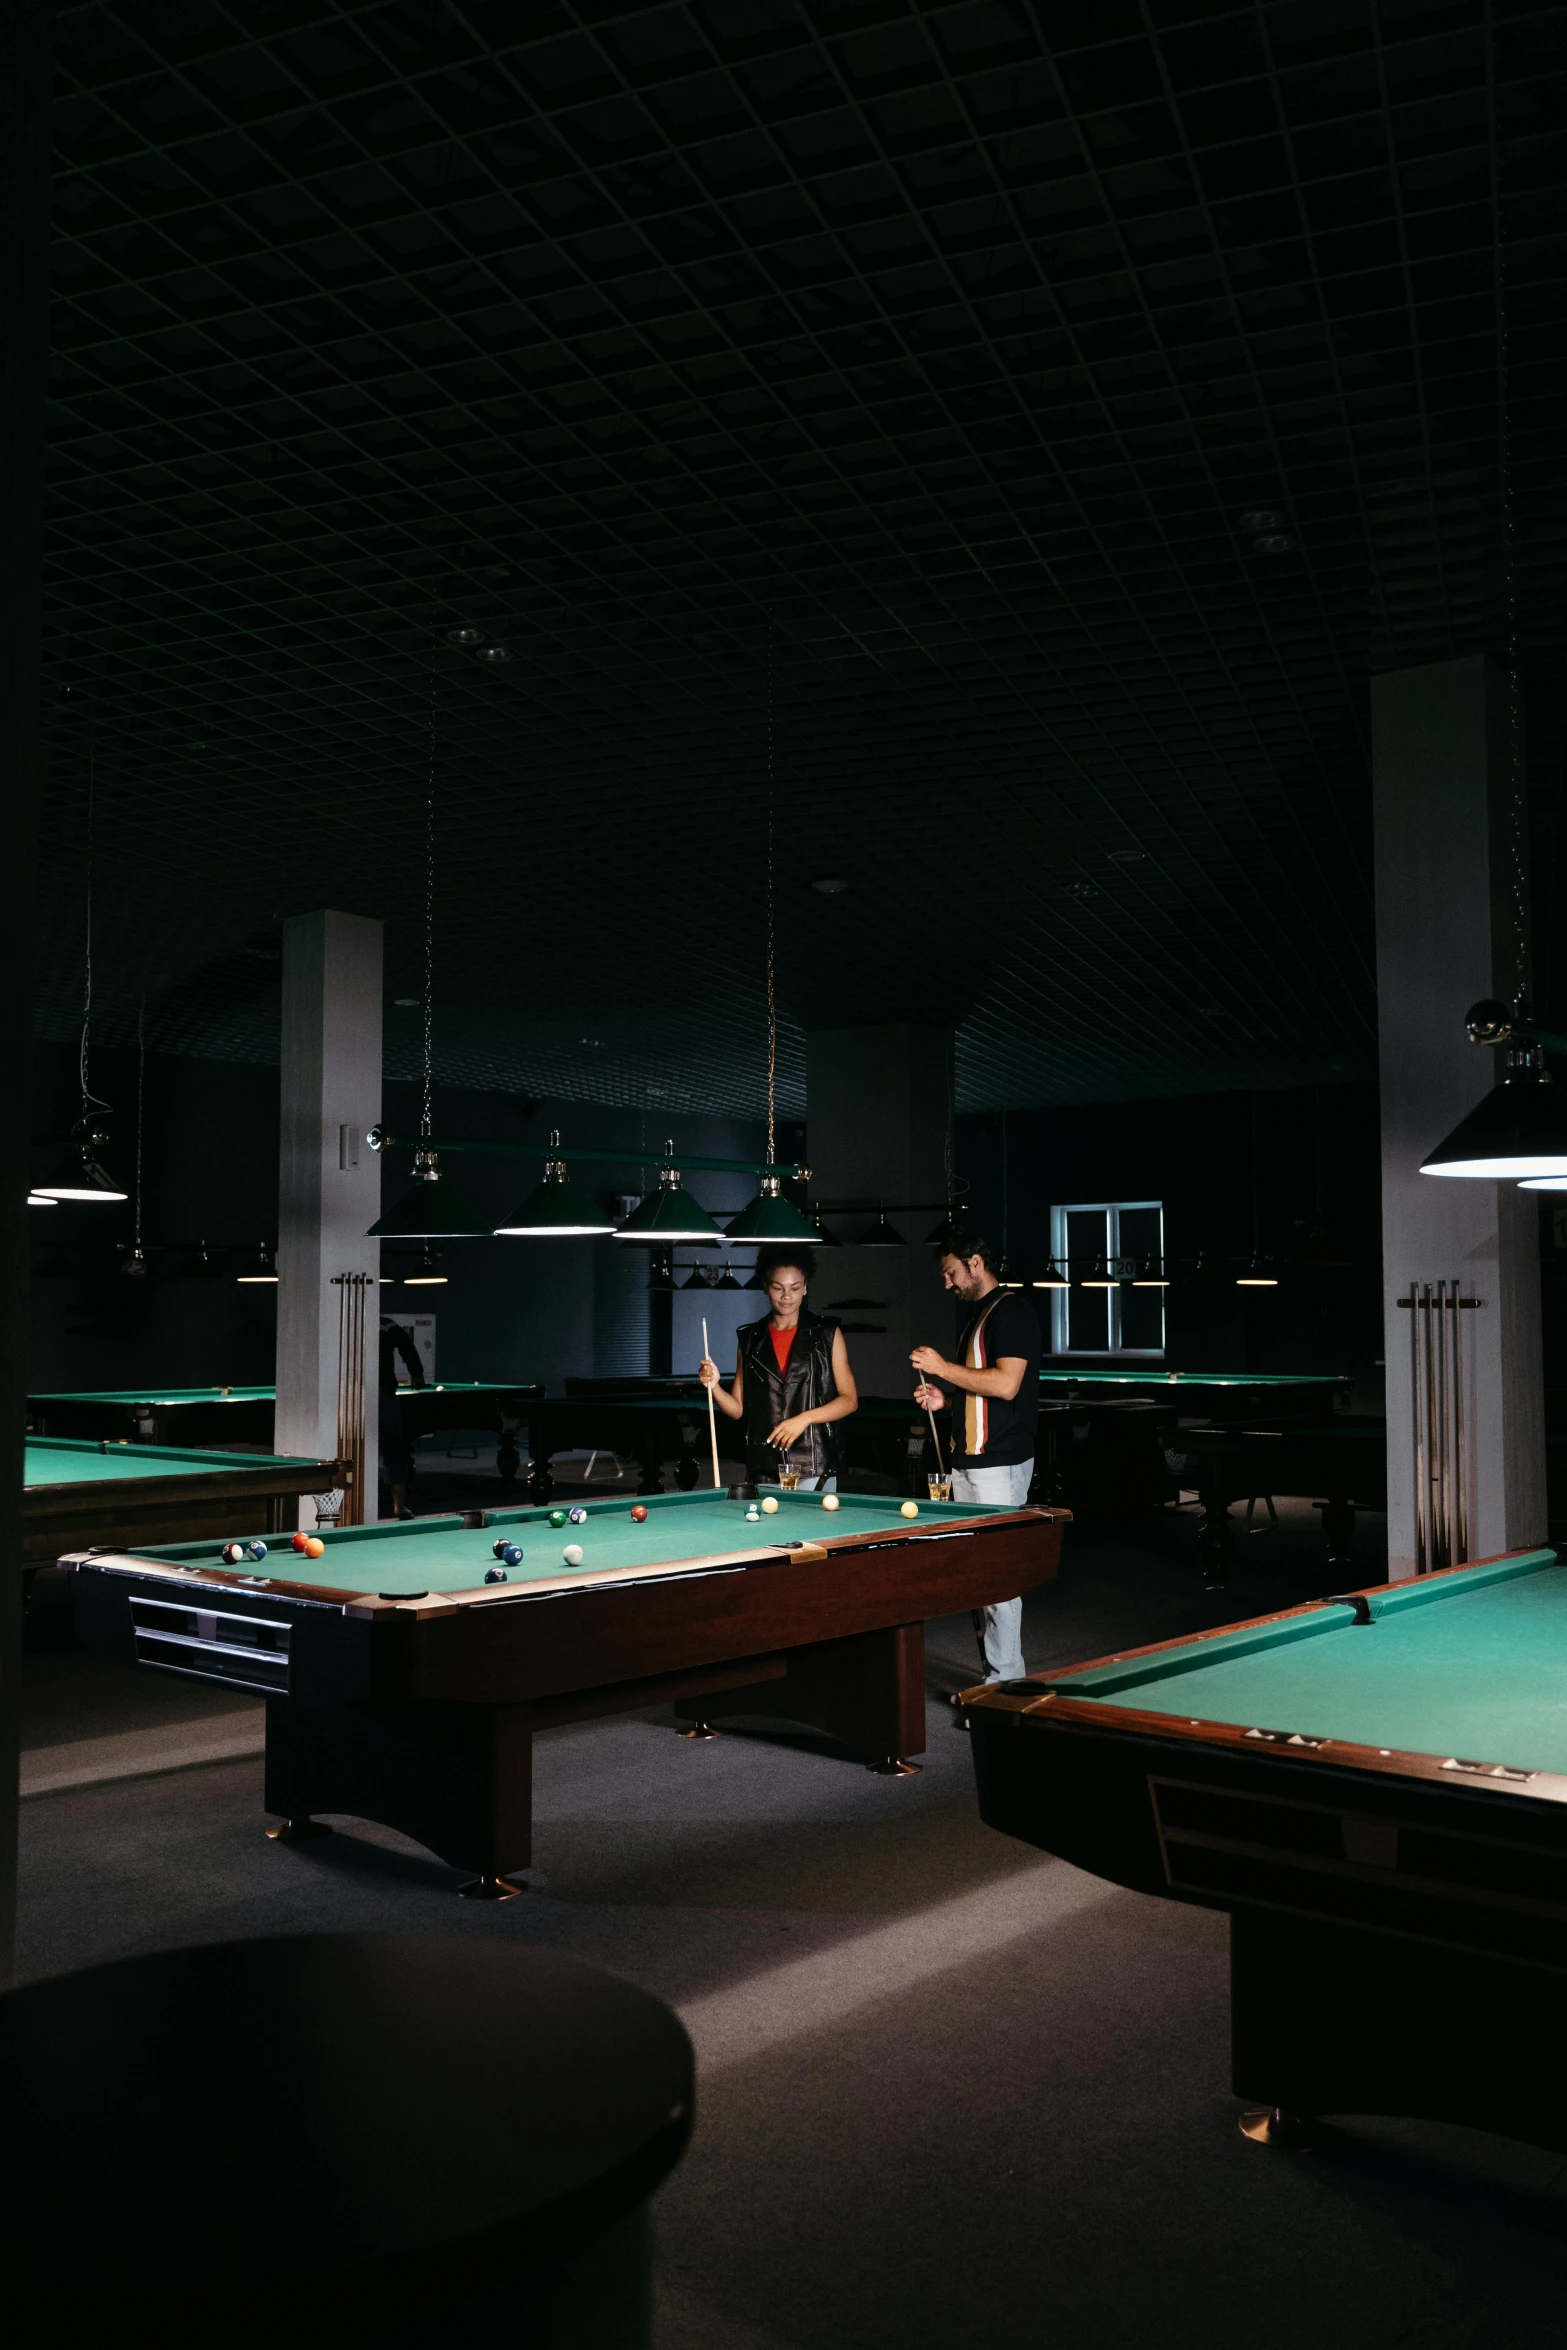 two people sitting on the edge of some pool tables